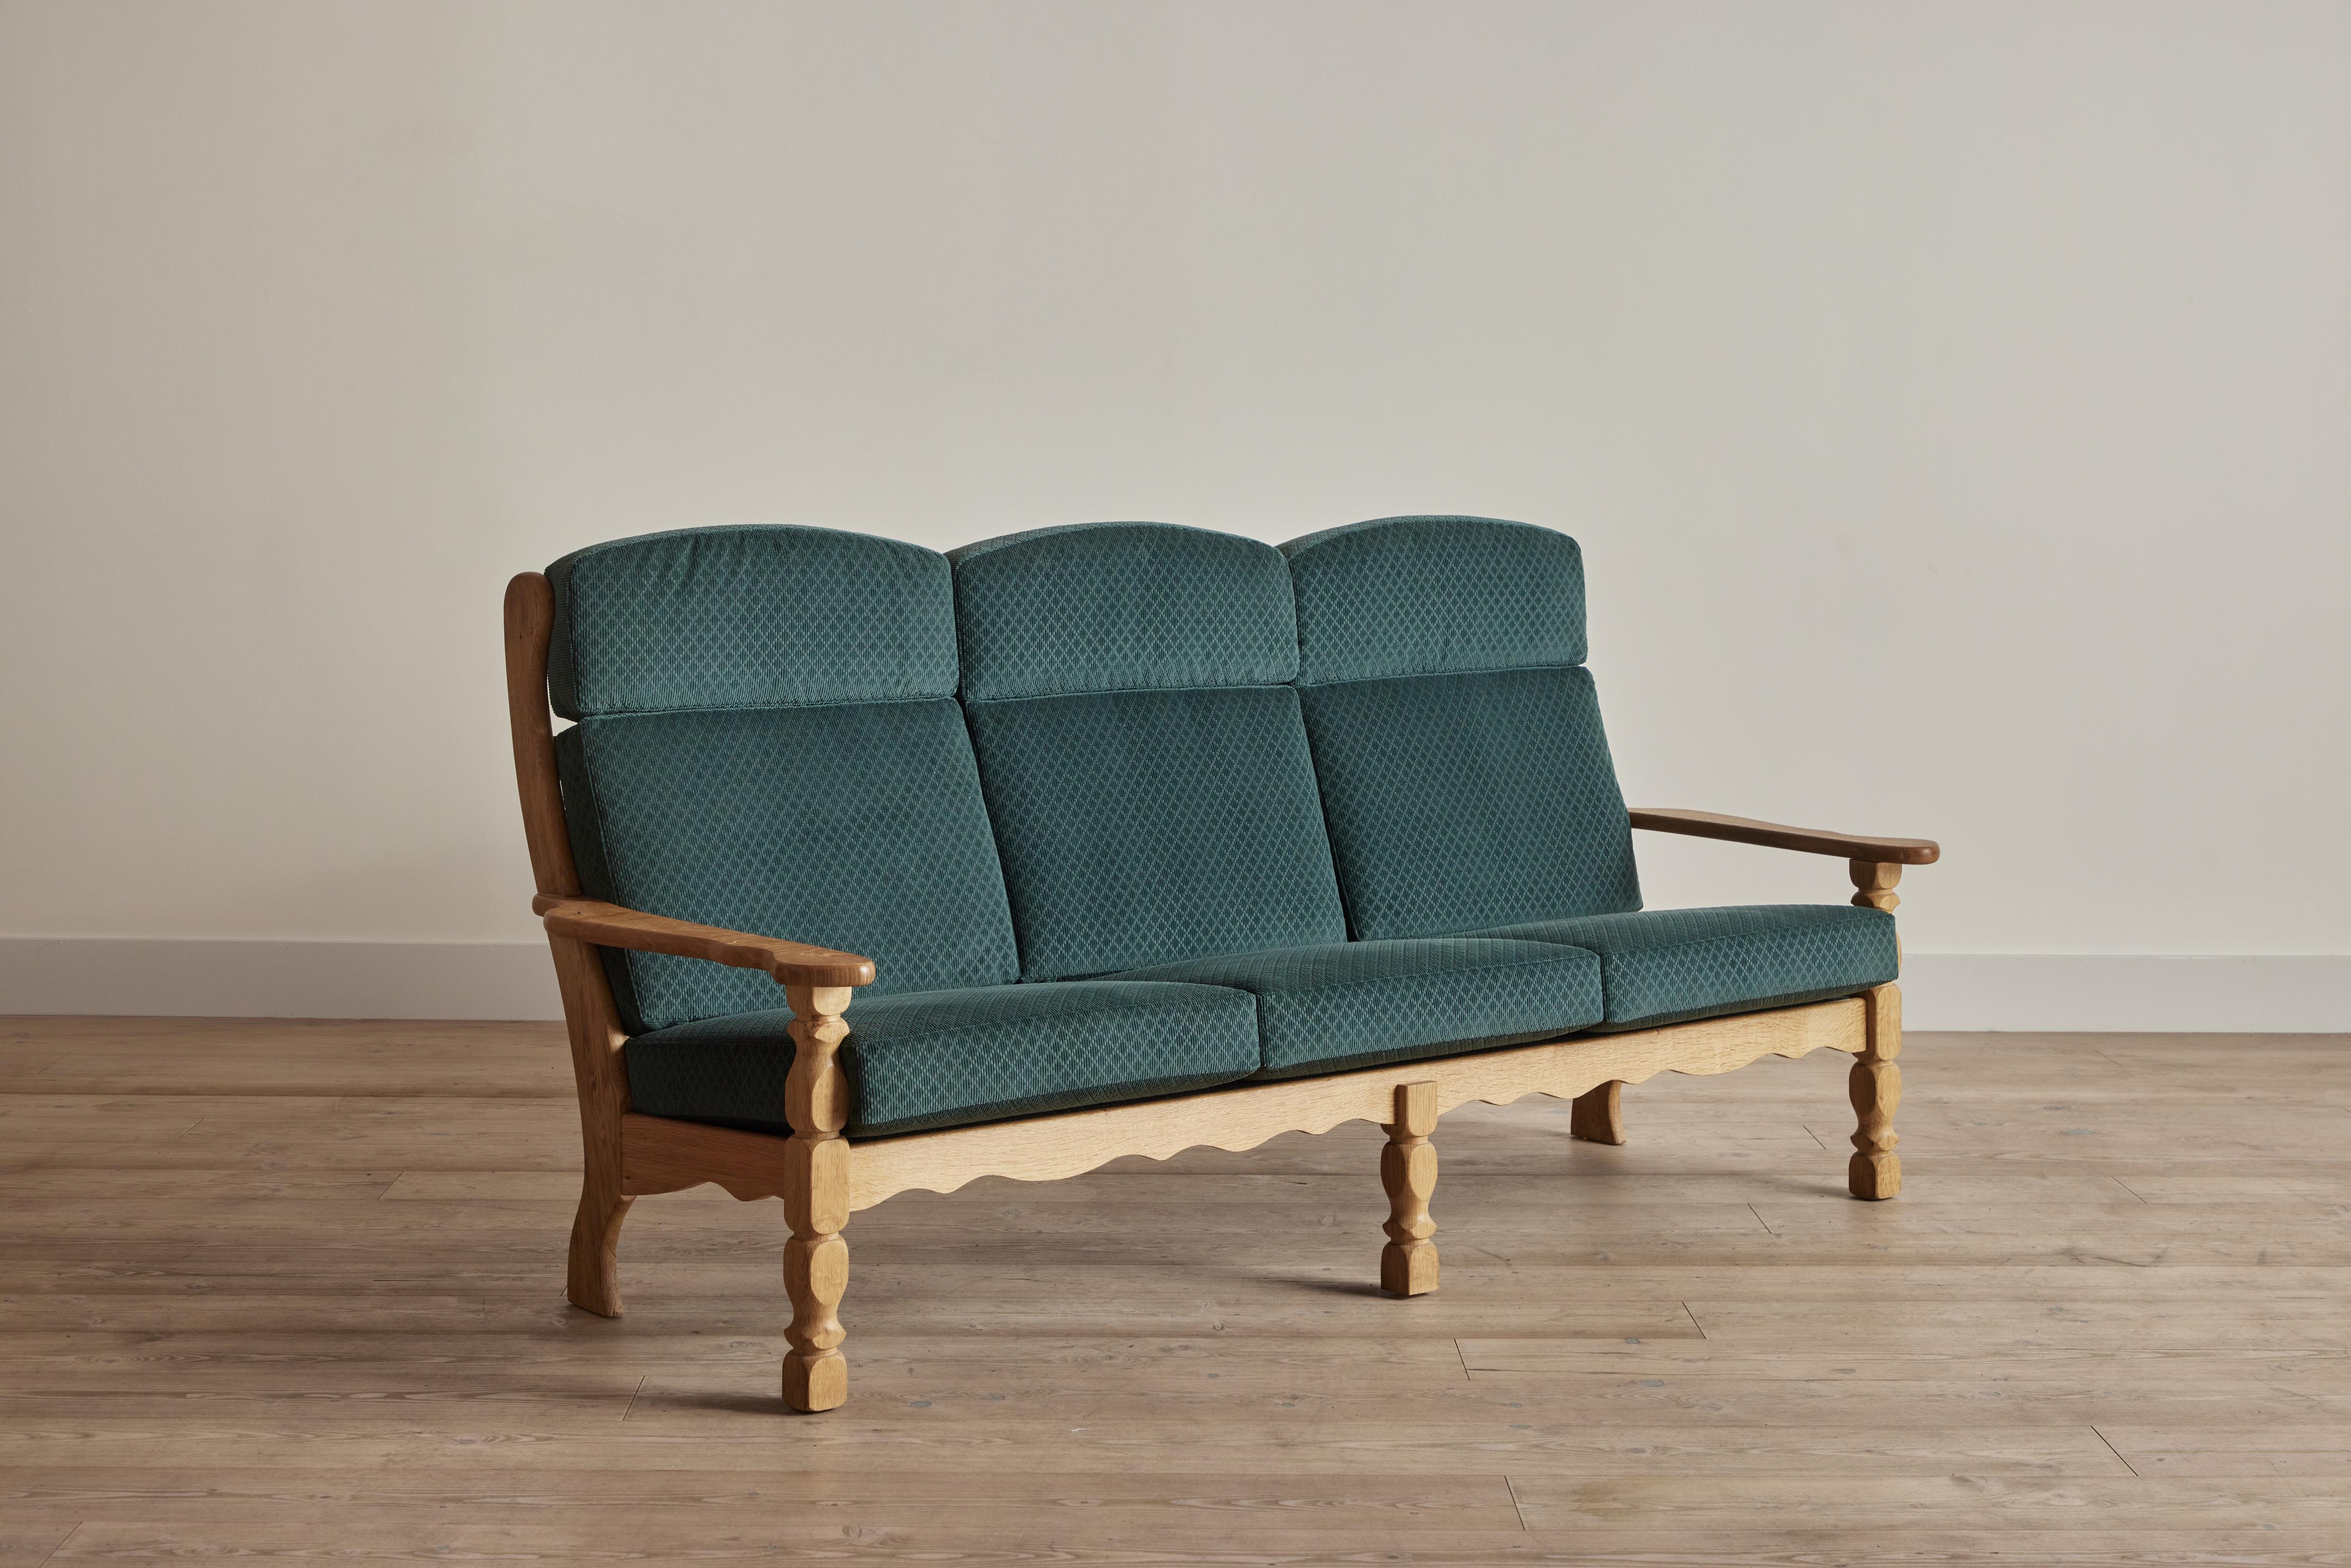 Carved oak wood sofa attributed to Danish designer Henning Kjaernulf. This 1960s sofa has been reupholstered in George Spencer's Clarence fabric in Twilight. Wood frame has been cleaned and waxed. Some wear on wood that is consistent with age and